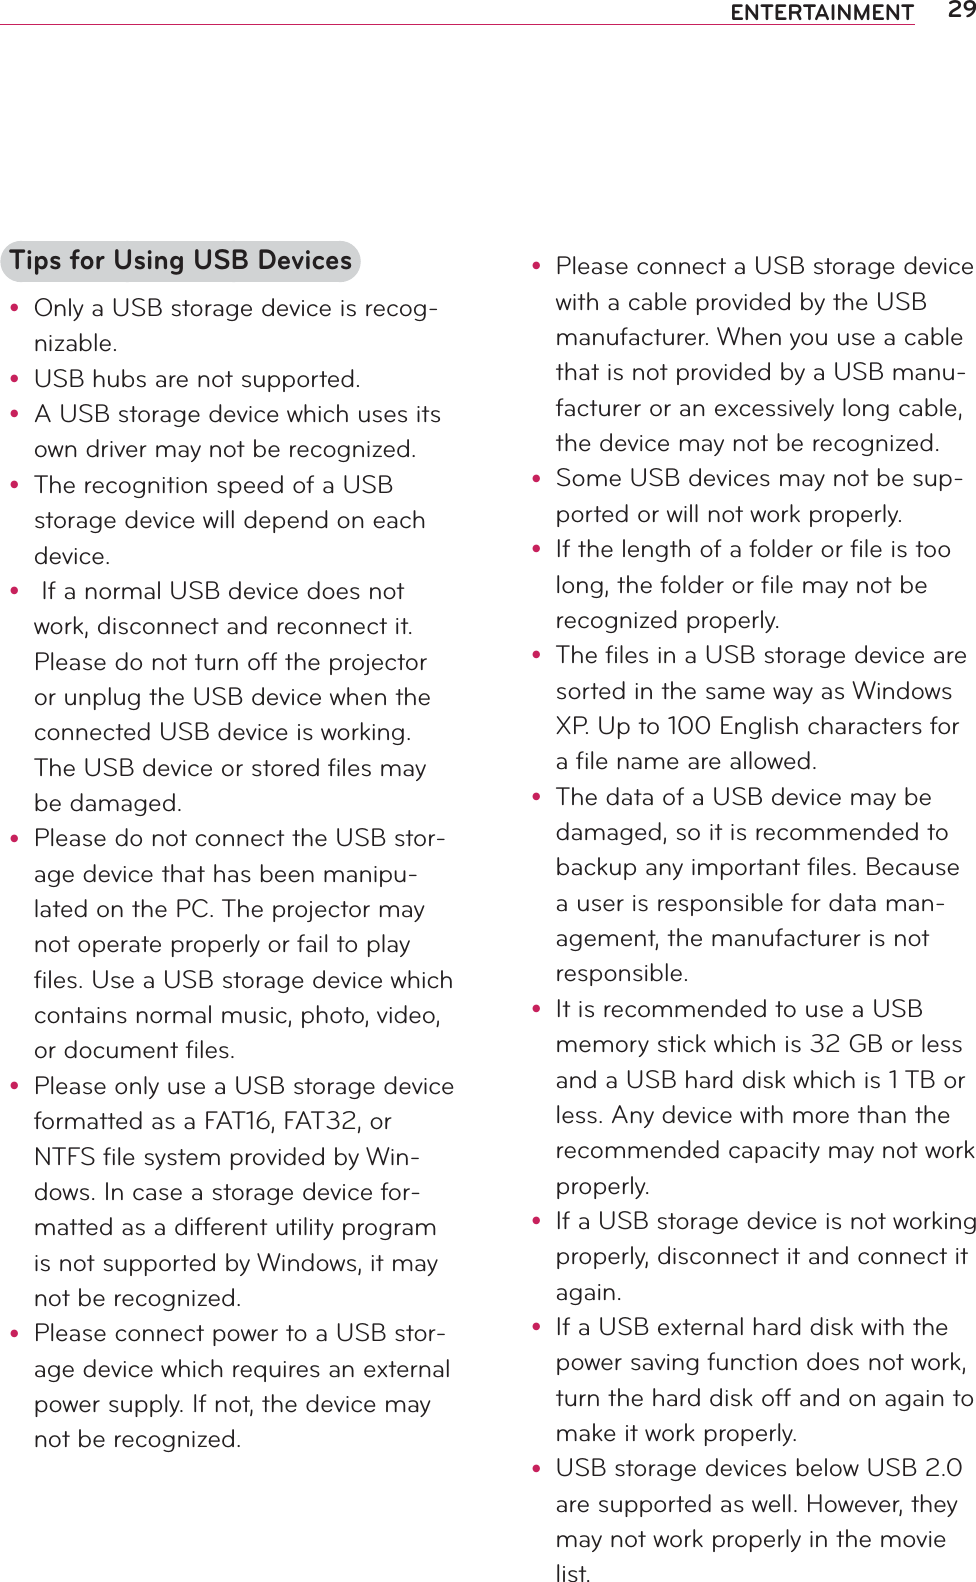 29ENTERTAINMENTTips for Using USB Devicesy Only a USB storage device is recog-nizable.y USB hubs are not supported.y A USB storage device which uses its own driver may not be recognized.y The recognition speed of a USB storage device will depend on each device.y  If a normal USB device does not work, disconnect and reconnect it. Please do not turn off the projector or unplug the USB device when the connected USB device is working. The USB device or stored files may be damaged.y Please do not connect the USB stor-age device that has been manipu-lated on the PC. The projector may not operate properly or fail to play files. Use a USB storage device which contains normal music, photo, video, or document files.y Please only use a USB storage device formatted as a FAT16, FAT32, or NTFS file system provided by Win-dows. In case a storage device for-matted as a different utility program is not supported by Windows, it may not be recognized.y Please connect power to a USB stor-age device which requires an external power supply. If not, the device may not be recognized.y Please connect a USB storage device with a cable provided by the USB manufacturer. When you use a cable that is not provided by a USB manu-facturer or an excessively long cable, the device may not be recognized.y Some USB devices may not be sup-ported or will not work properly.y If the length of a folder or file is too long, the folder or file may not be recognized properly.y The files in a USB storage device are sorted in the same way as Windows XP. Up to 100 English characters for a file name are allowed.y The data of a USB device may be damaged, so it is recommended to backup any important files. Because a user is responsible for data man-agement, the manufacturer is not responsible.y It is recommended to use a USB memory stick which is 32 GB or less and a USB hard disk which is 1 TB or less. Any device with more than the recommended capacity may not work properly.y If a USB storage device is not working properly, disconnect it and connect it again.y If a USB external hard disk with the power saving function does not work, turn the hard disk off and on again to make it work properly.y USB storage devices below USB 2.0 are supported as well. However, they may not work properly in the movie list.